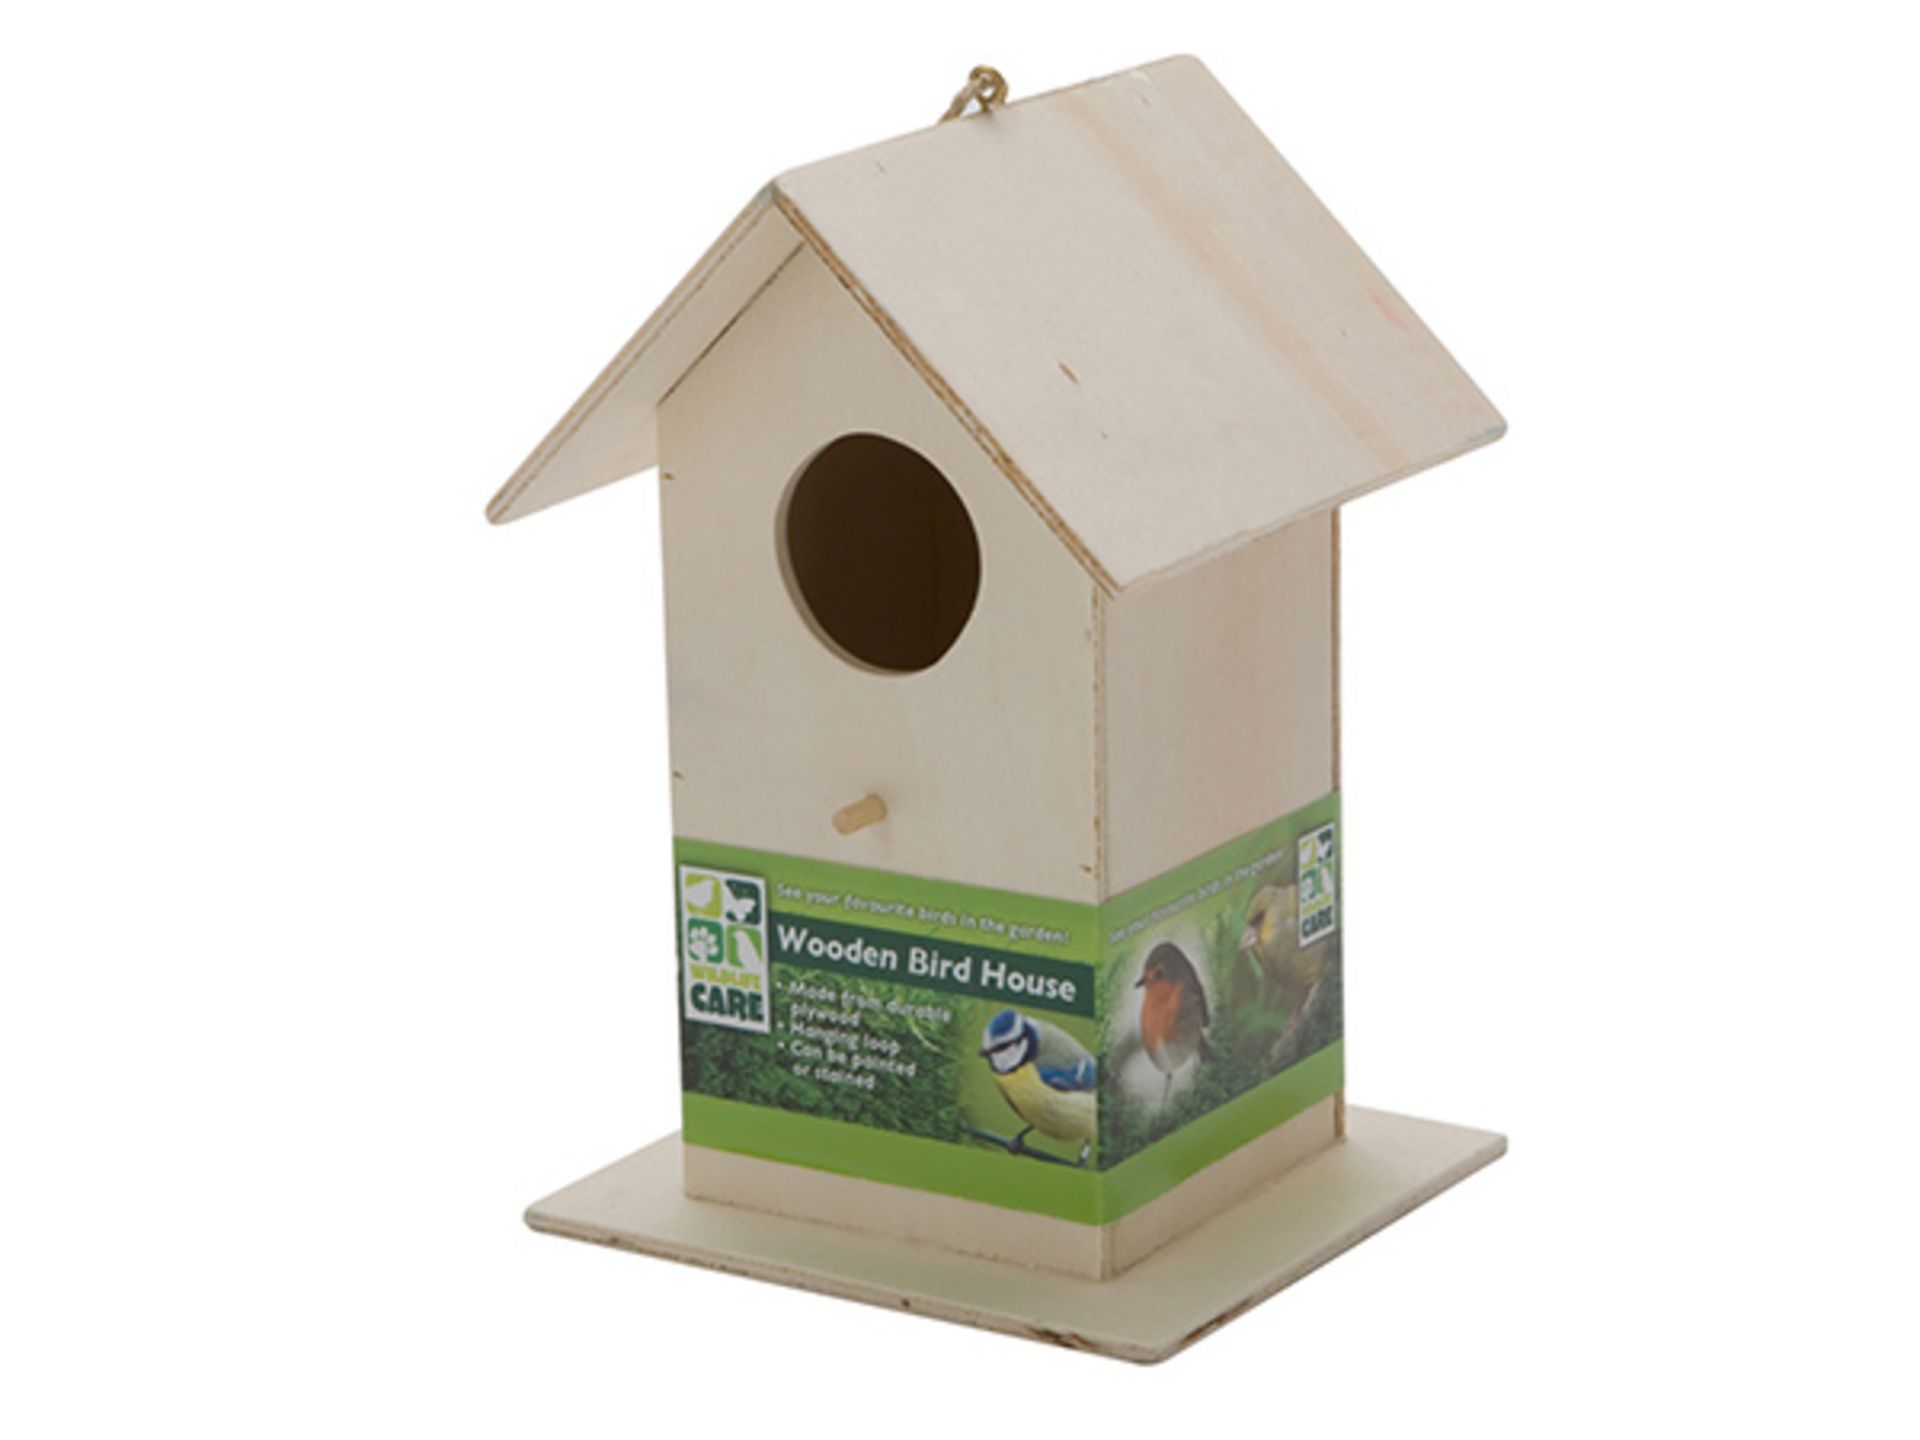 V *TRADE QTY* Brand New Wooden Bird House With Hanging Or Hook Mounting Fixing 18 x 8 cm X 5 YOUR